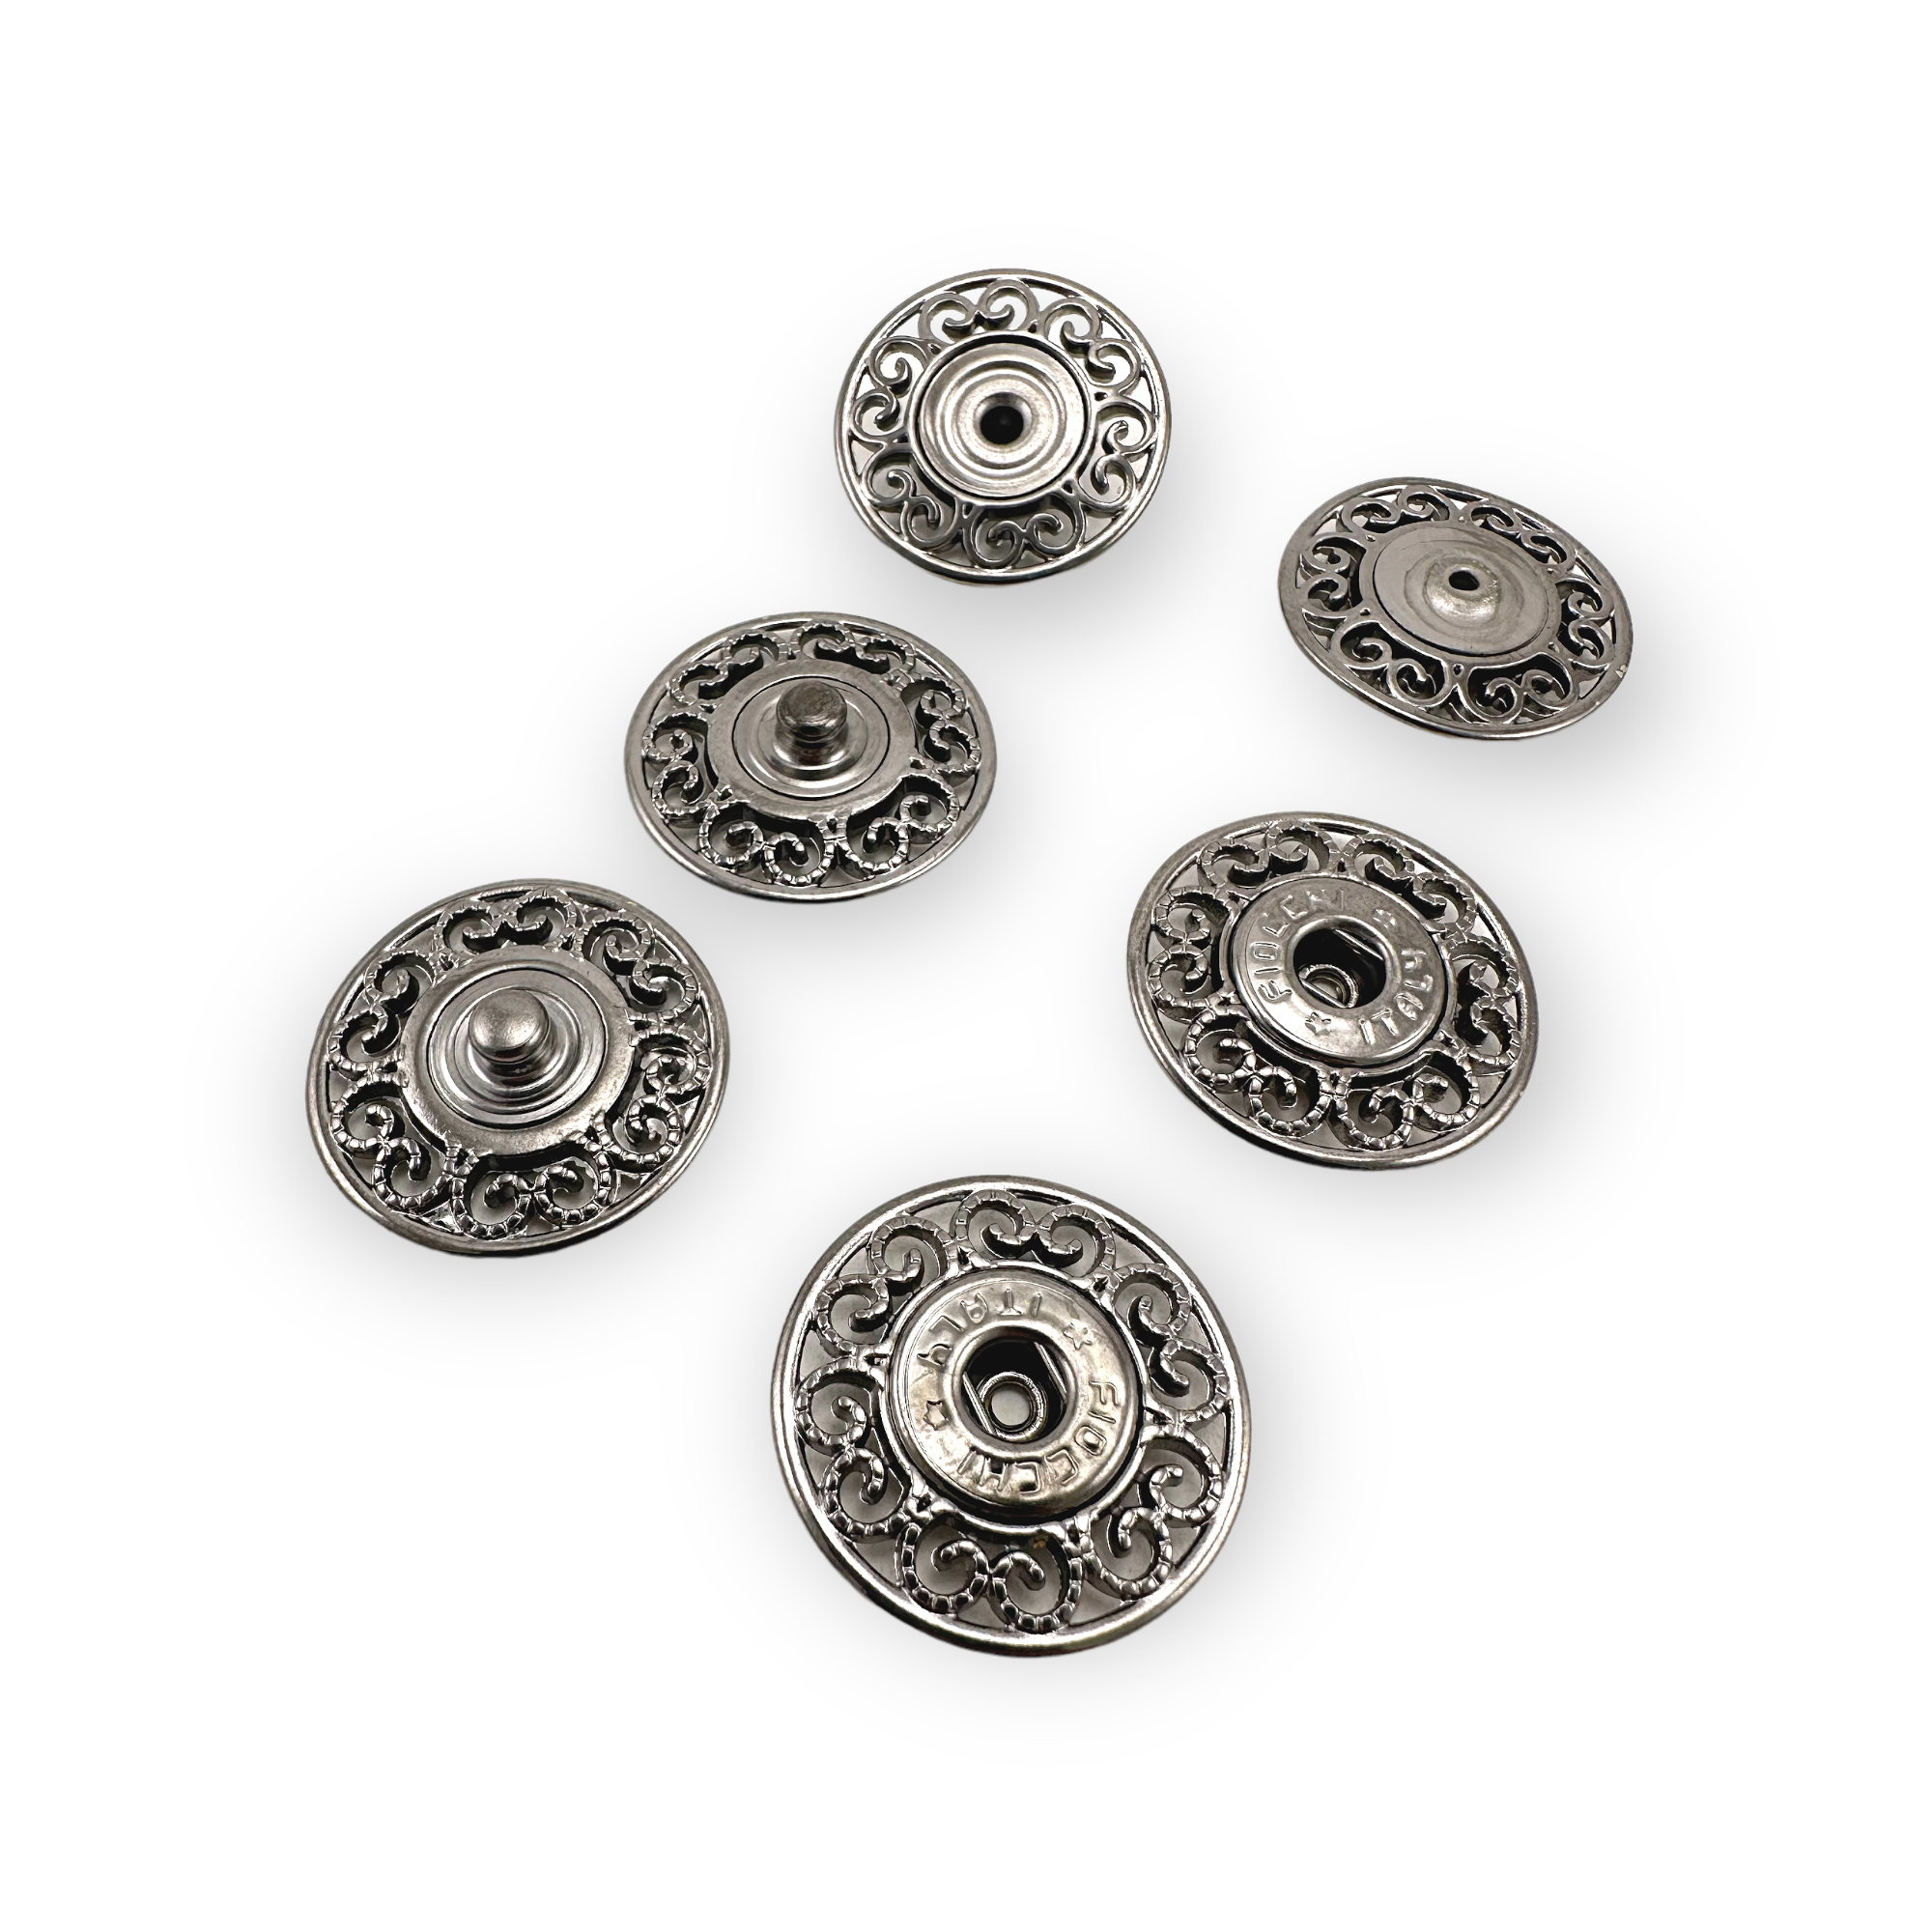  20 Pieces Jeans Button Tack Buttons Snap Fastener